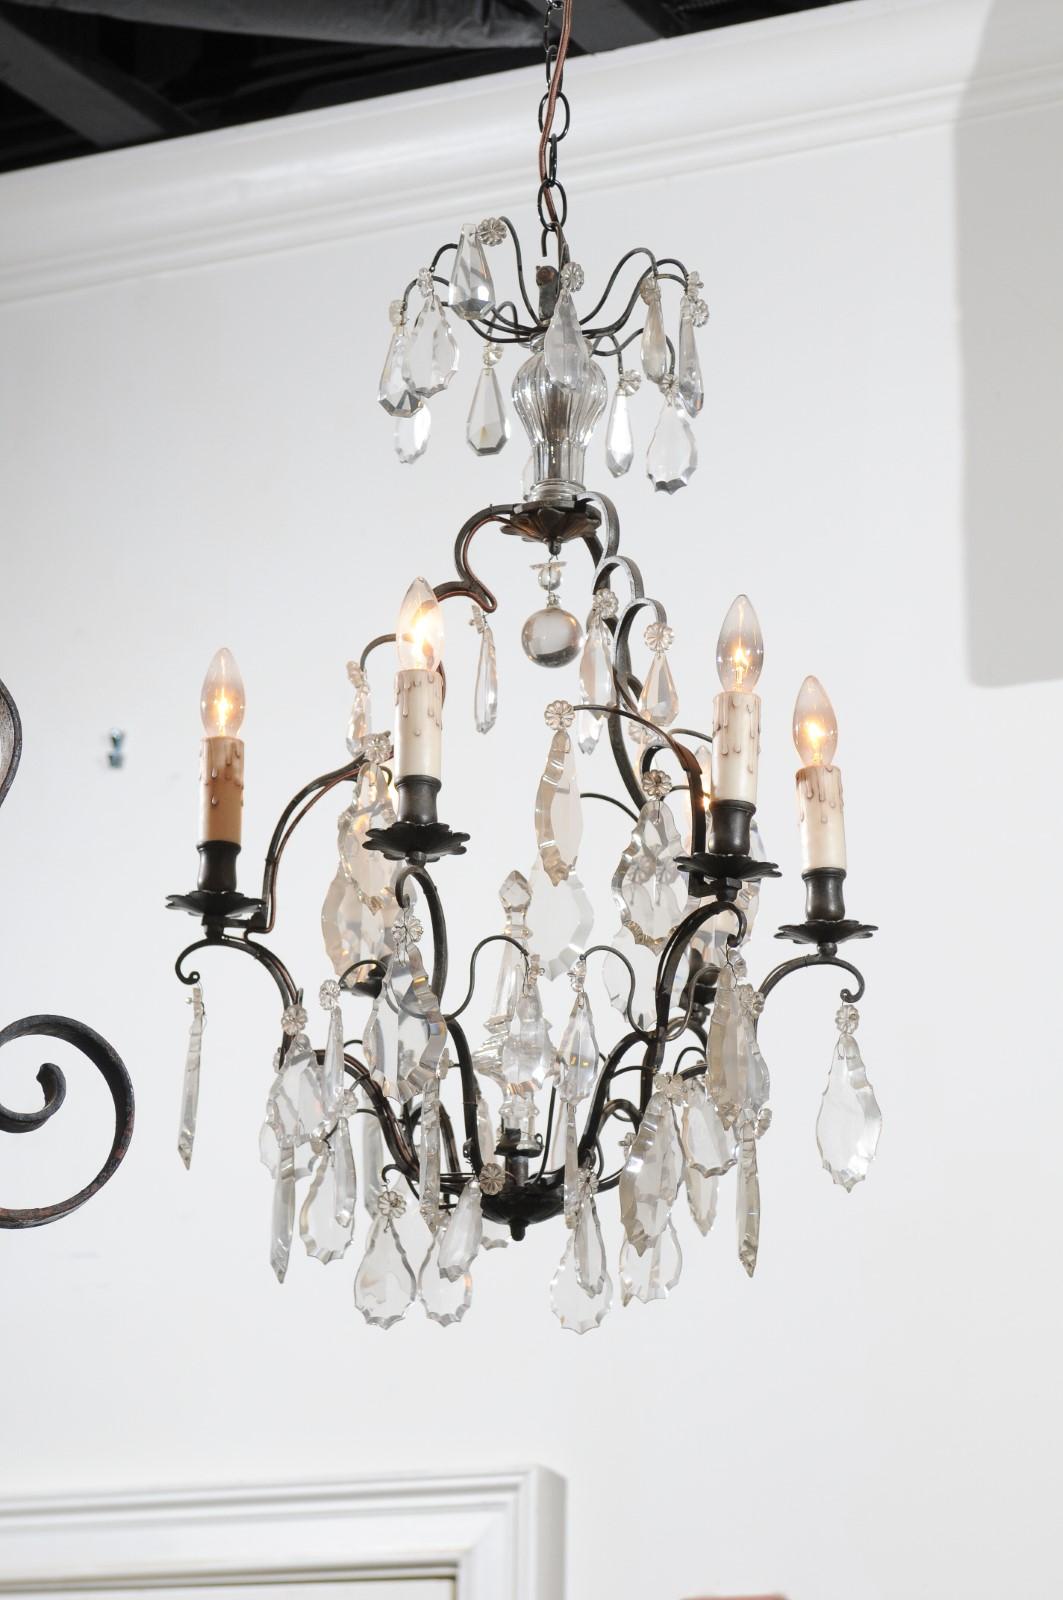 A French six-light crystal chandelier from the 19th century, with iron armature and obelisk accent. Born in France during the politically dynamic 19th century, this French chandelier features an iron scrolling armature supporting a variety of